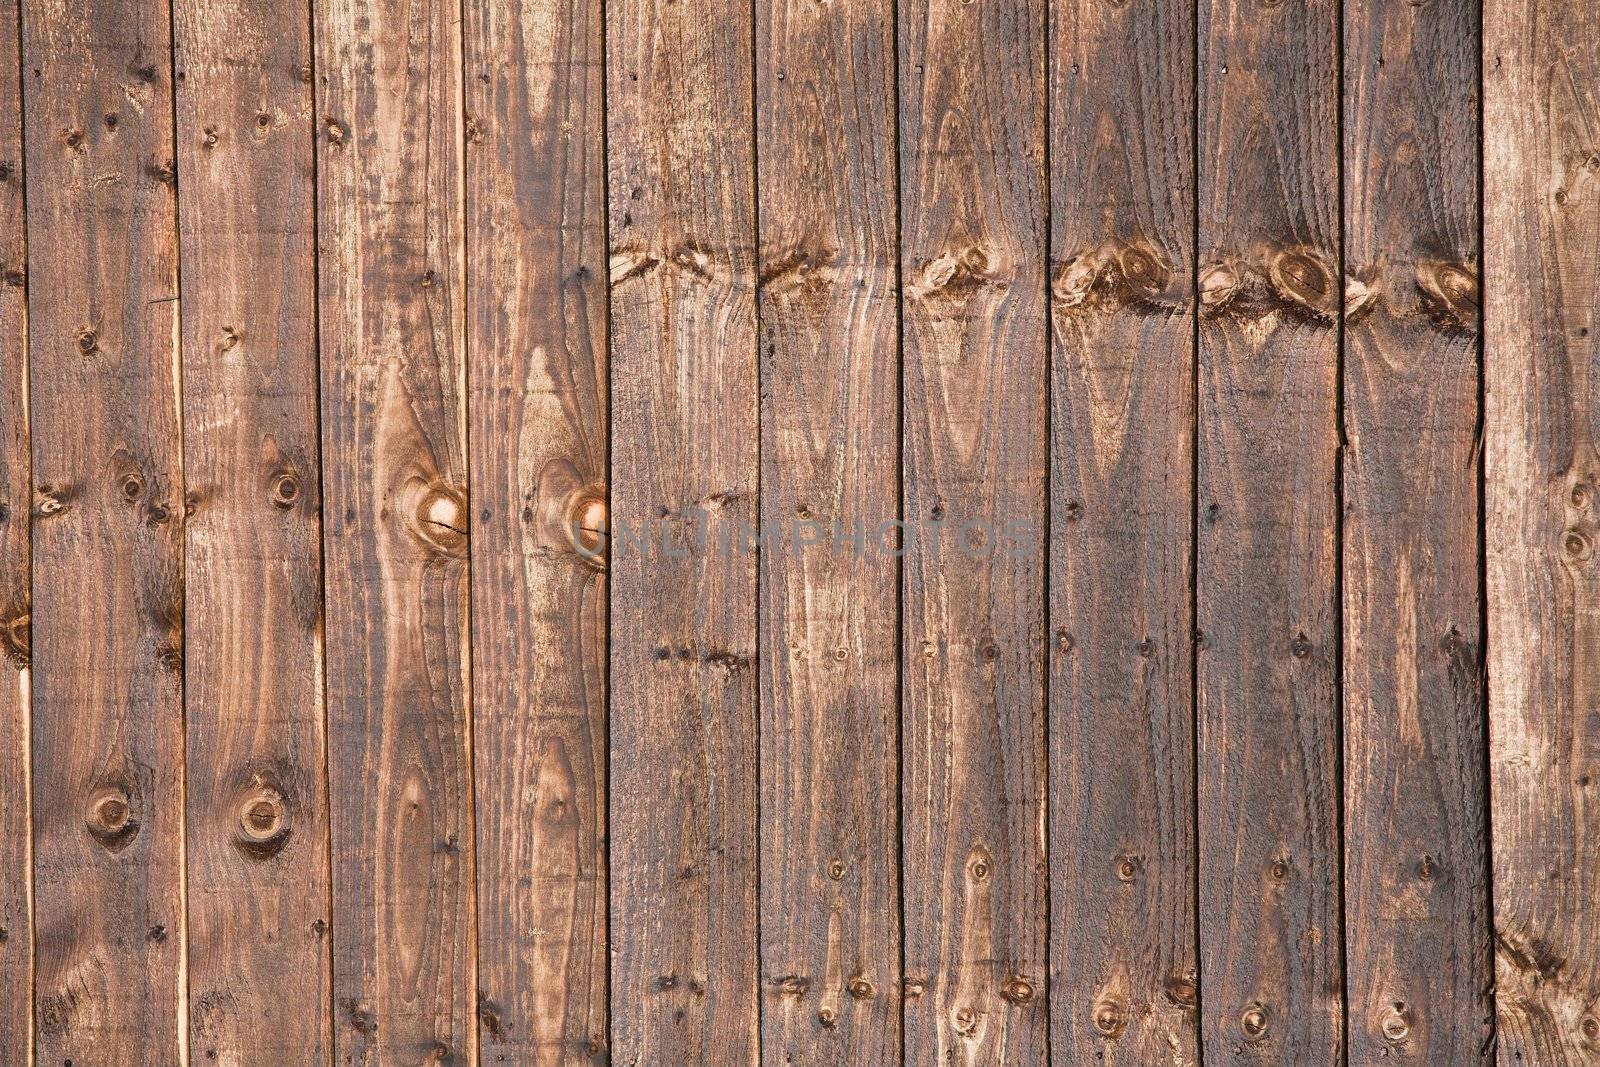 Wooden Fence treated with Creosote by grandaded